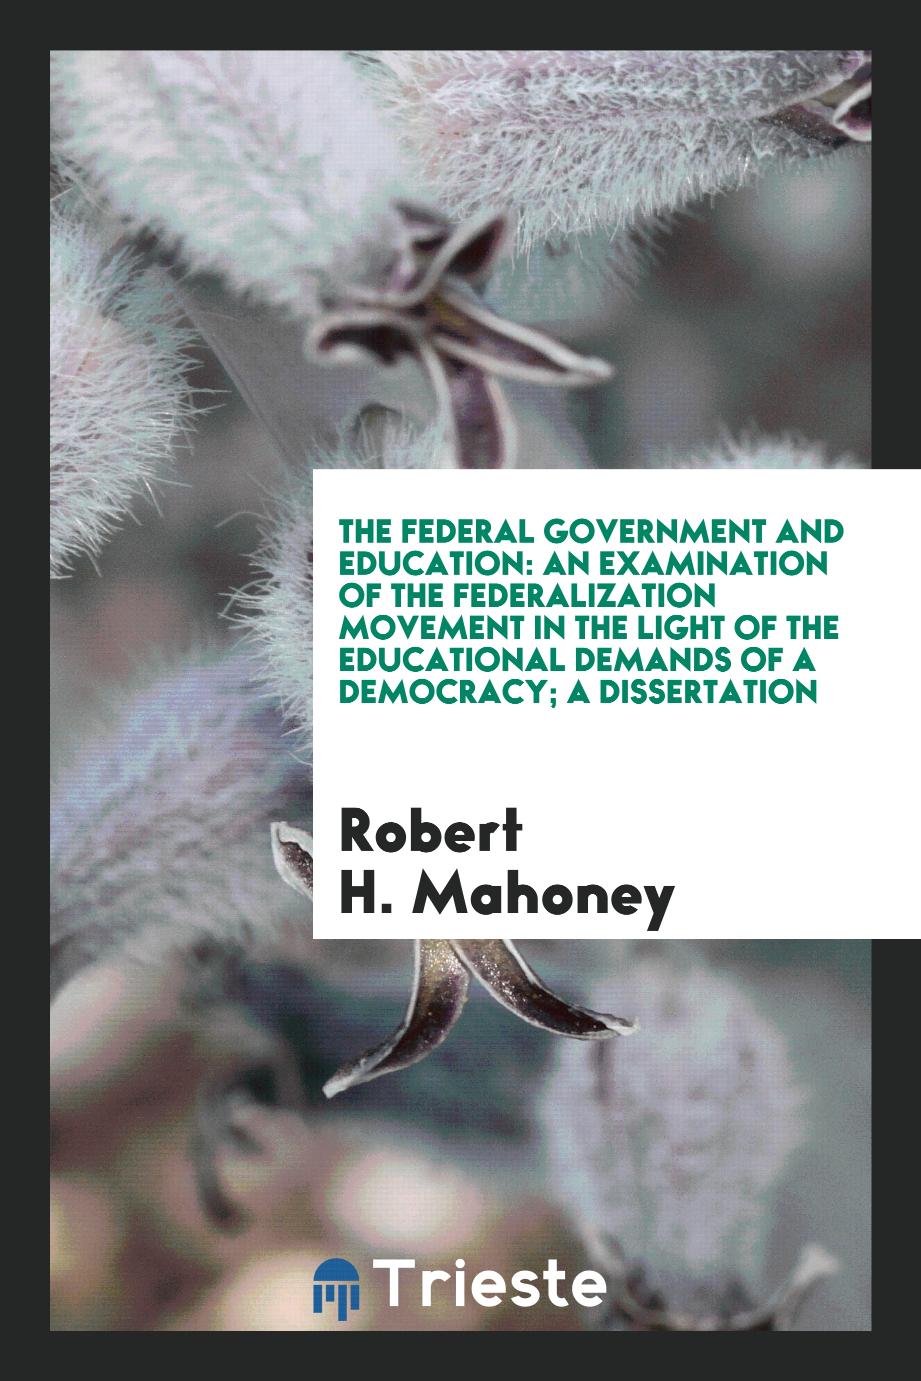 The Federal Government and Education: An Examination of the Federalization Movement in the Light of the Educational Demands of a Democracy; a dissertation